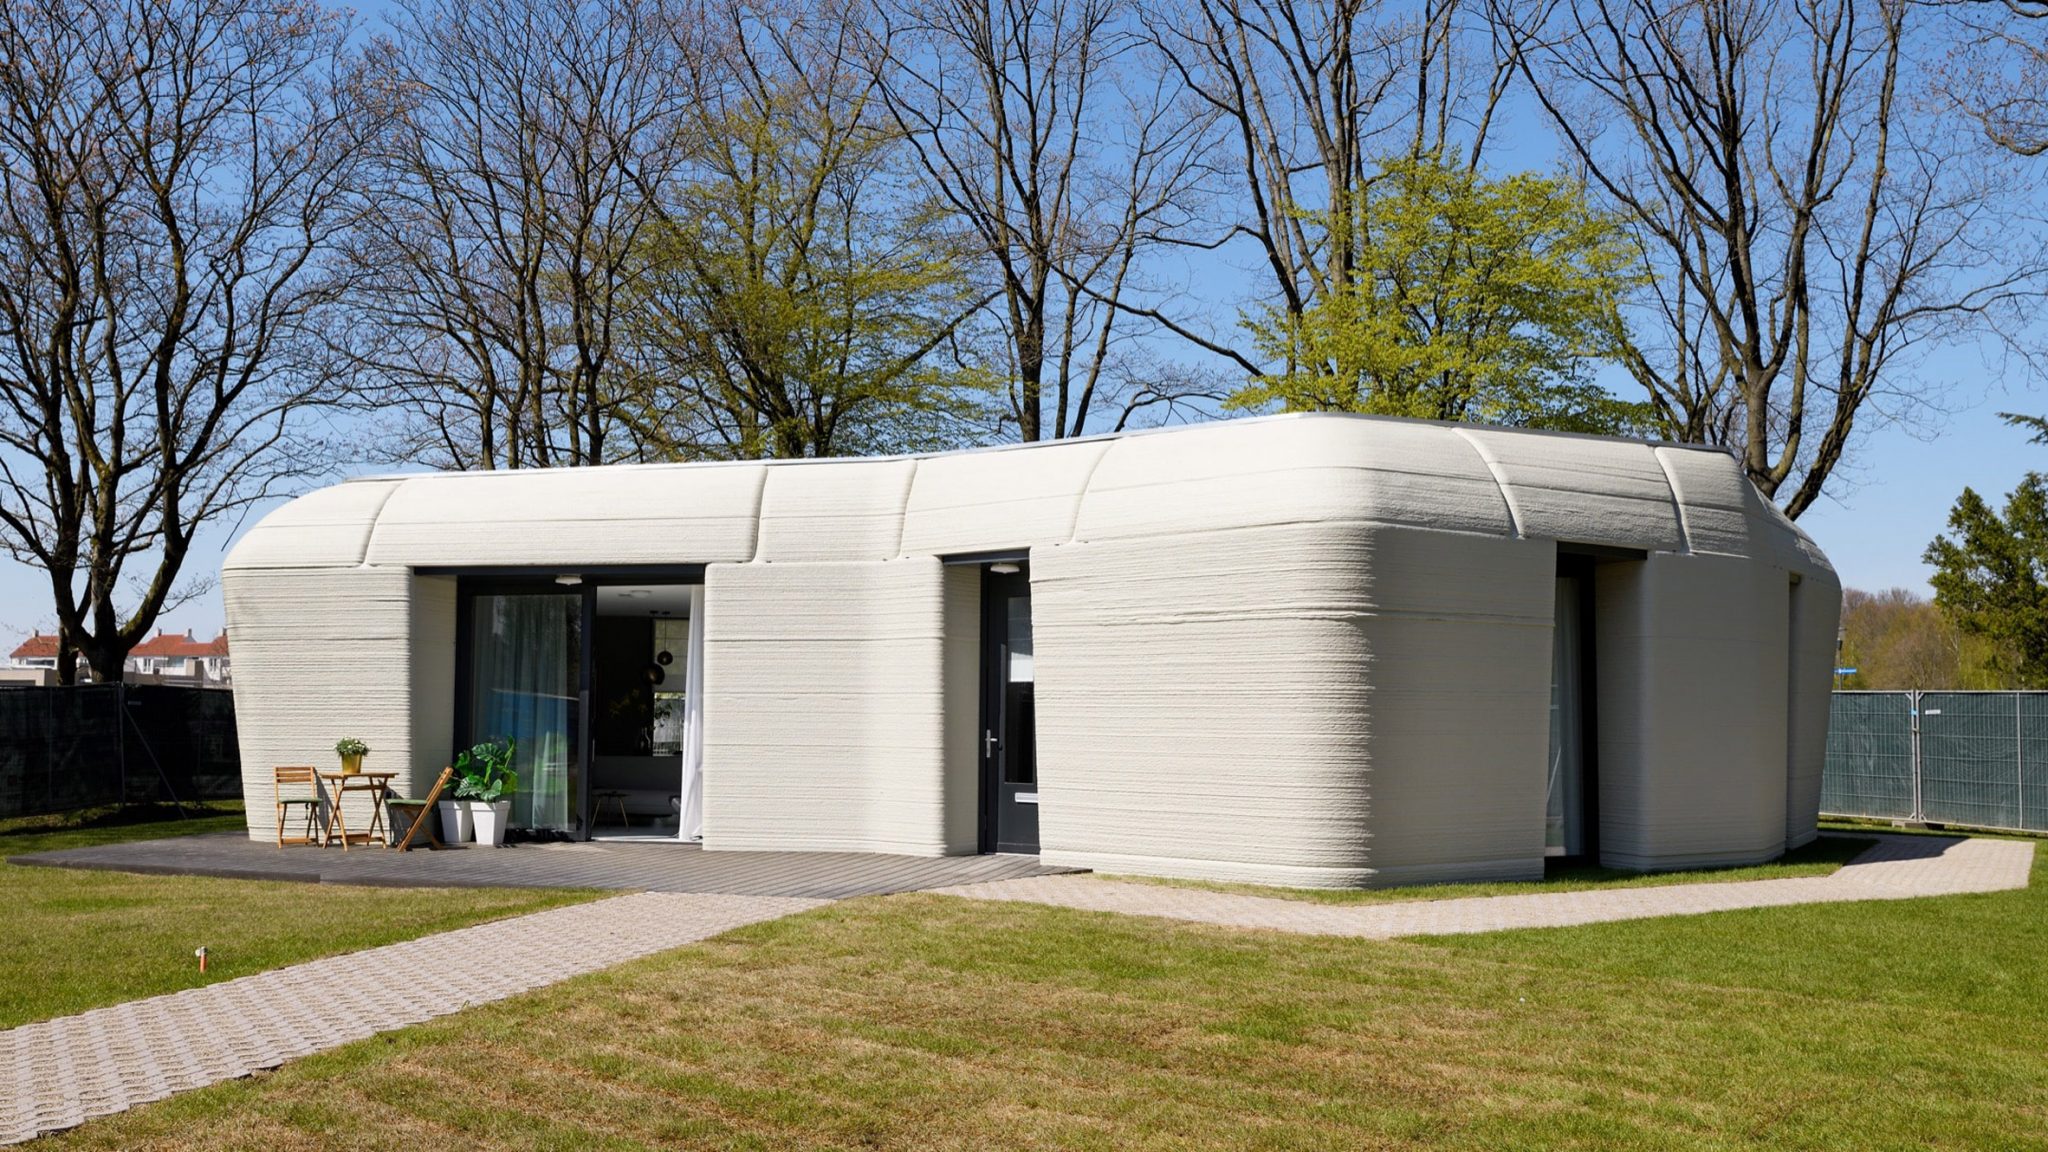 First tenants move into 3D-printed home in Eindhoven